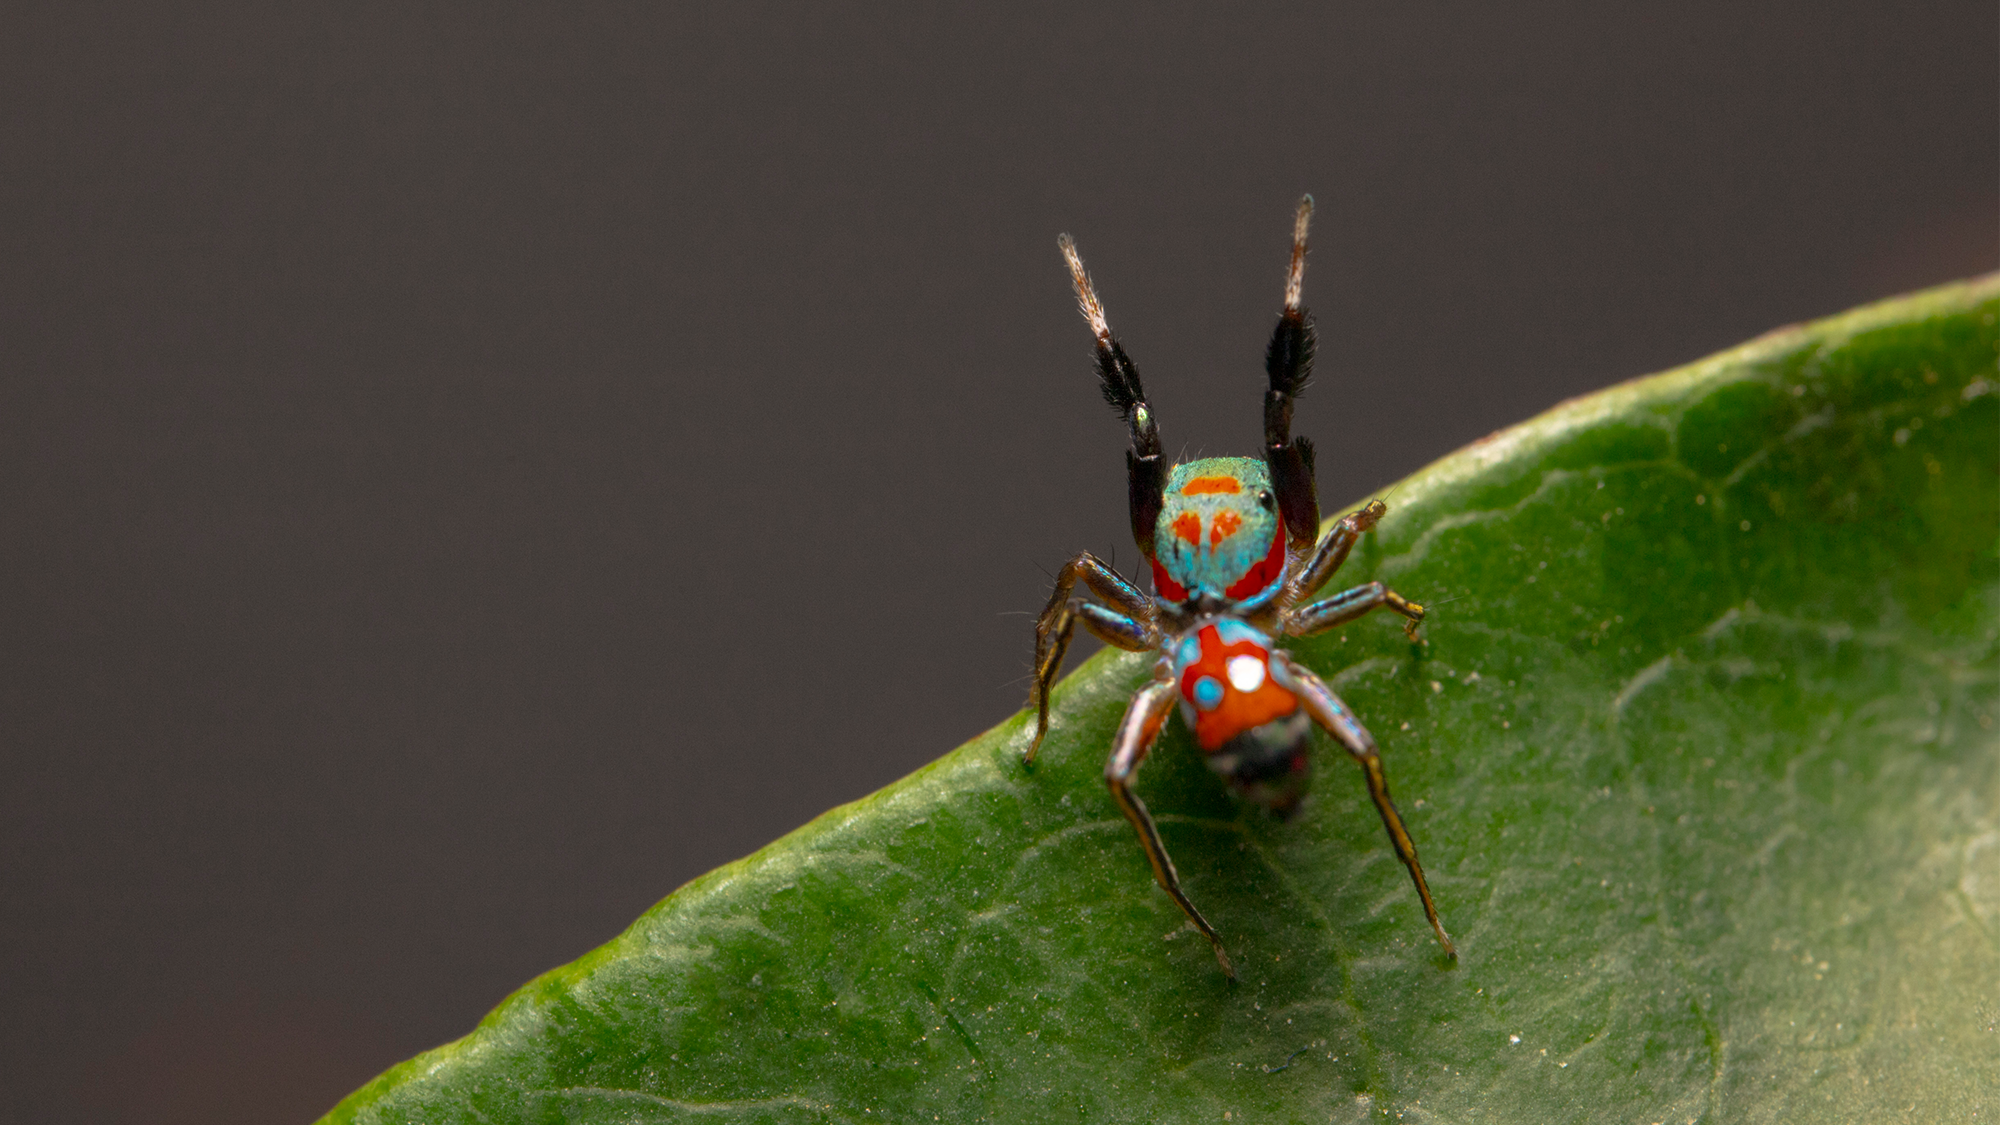 This spider pretends to be an ant, but not well enough to avoid being eaten